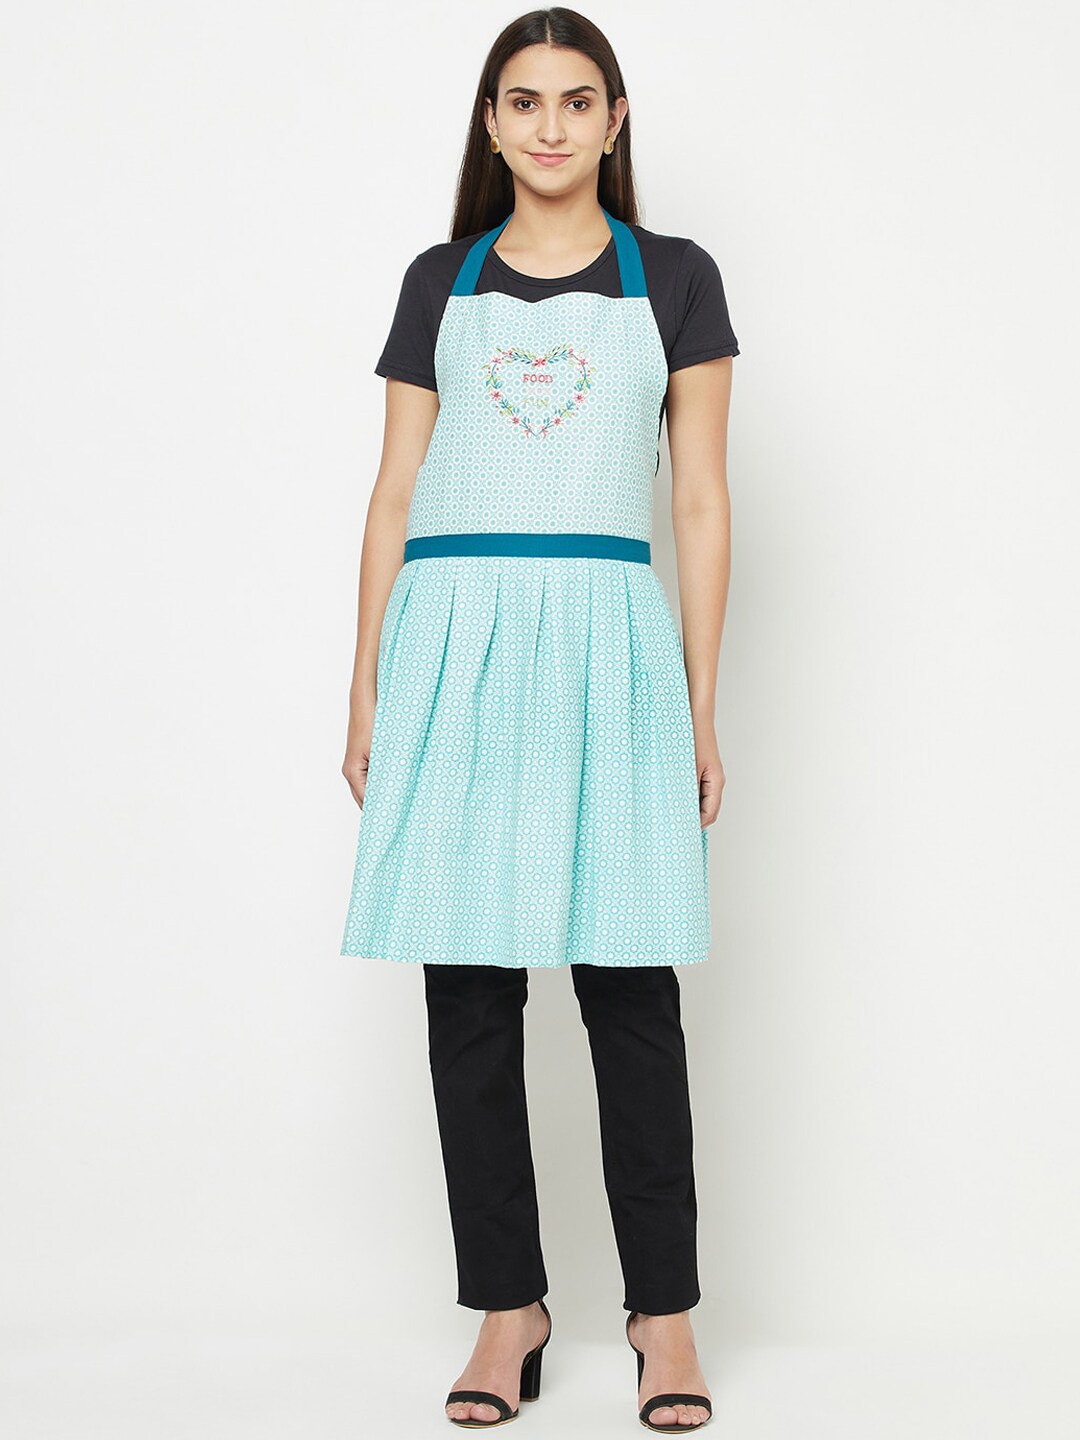 BLANC9 Teal Blue & White Printed Pure Cotton Apron Price in India